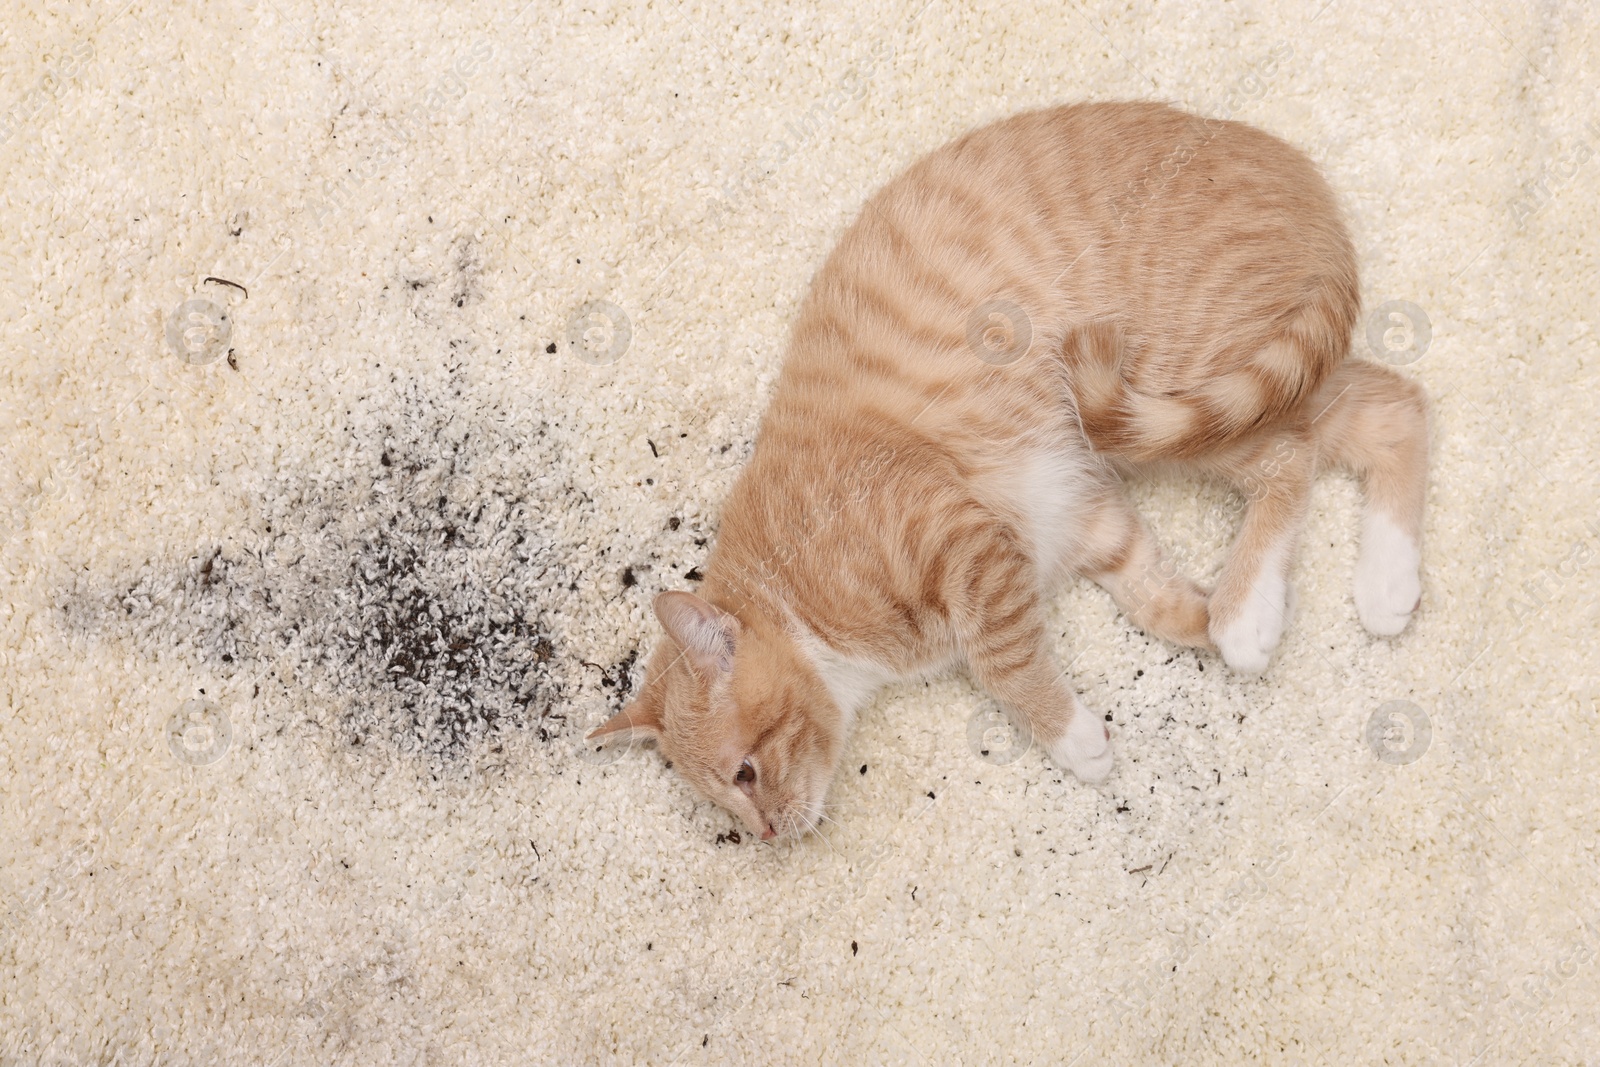 Photo of Cute ginger cat on carpet with scattered soil, top view